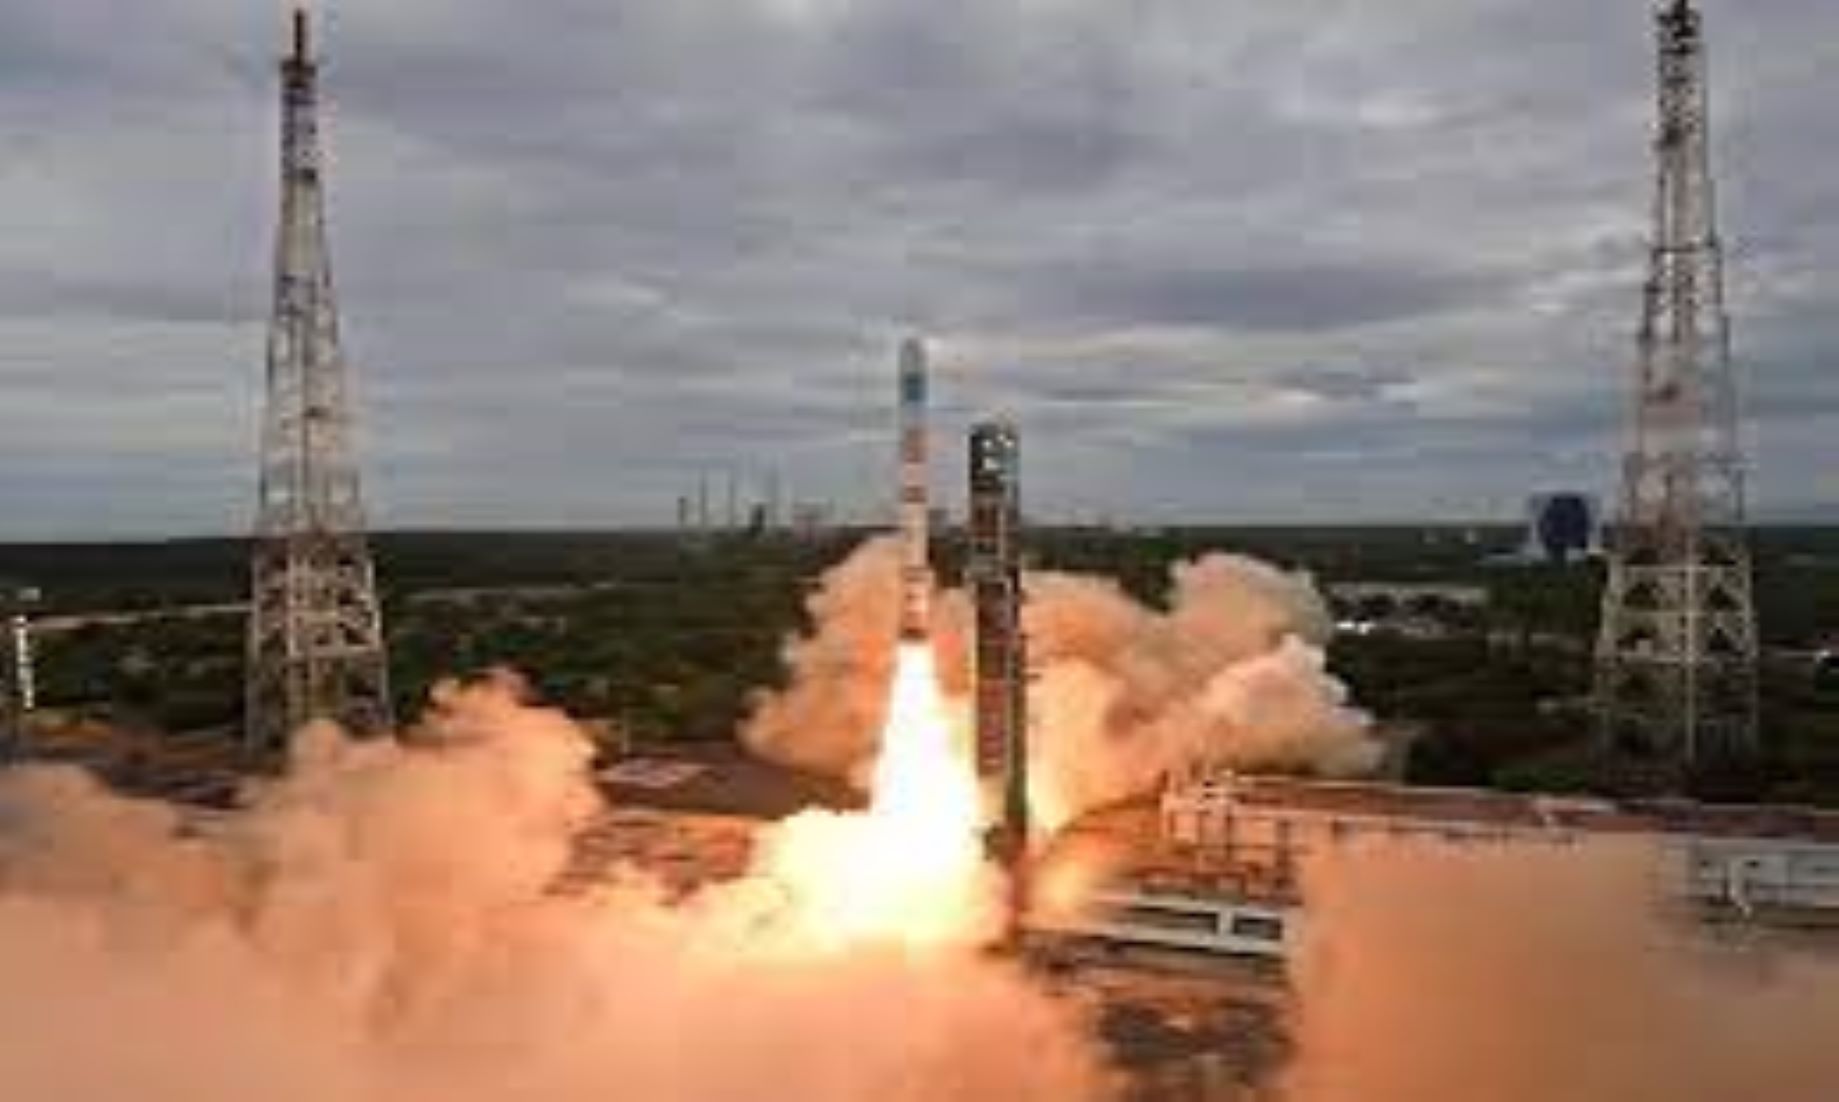 India’s Space Body Says Newly-Launched Small Satellites “No Longer Usable”